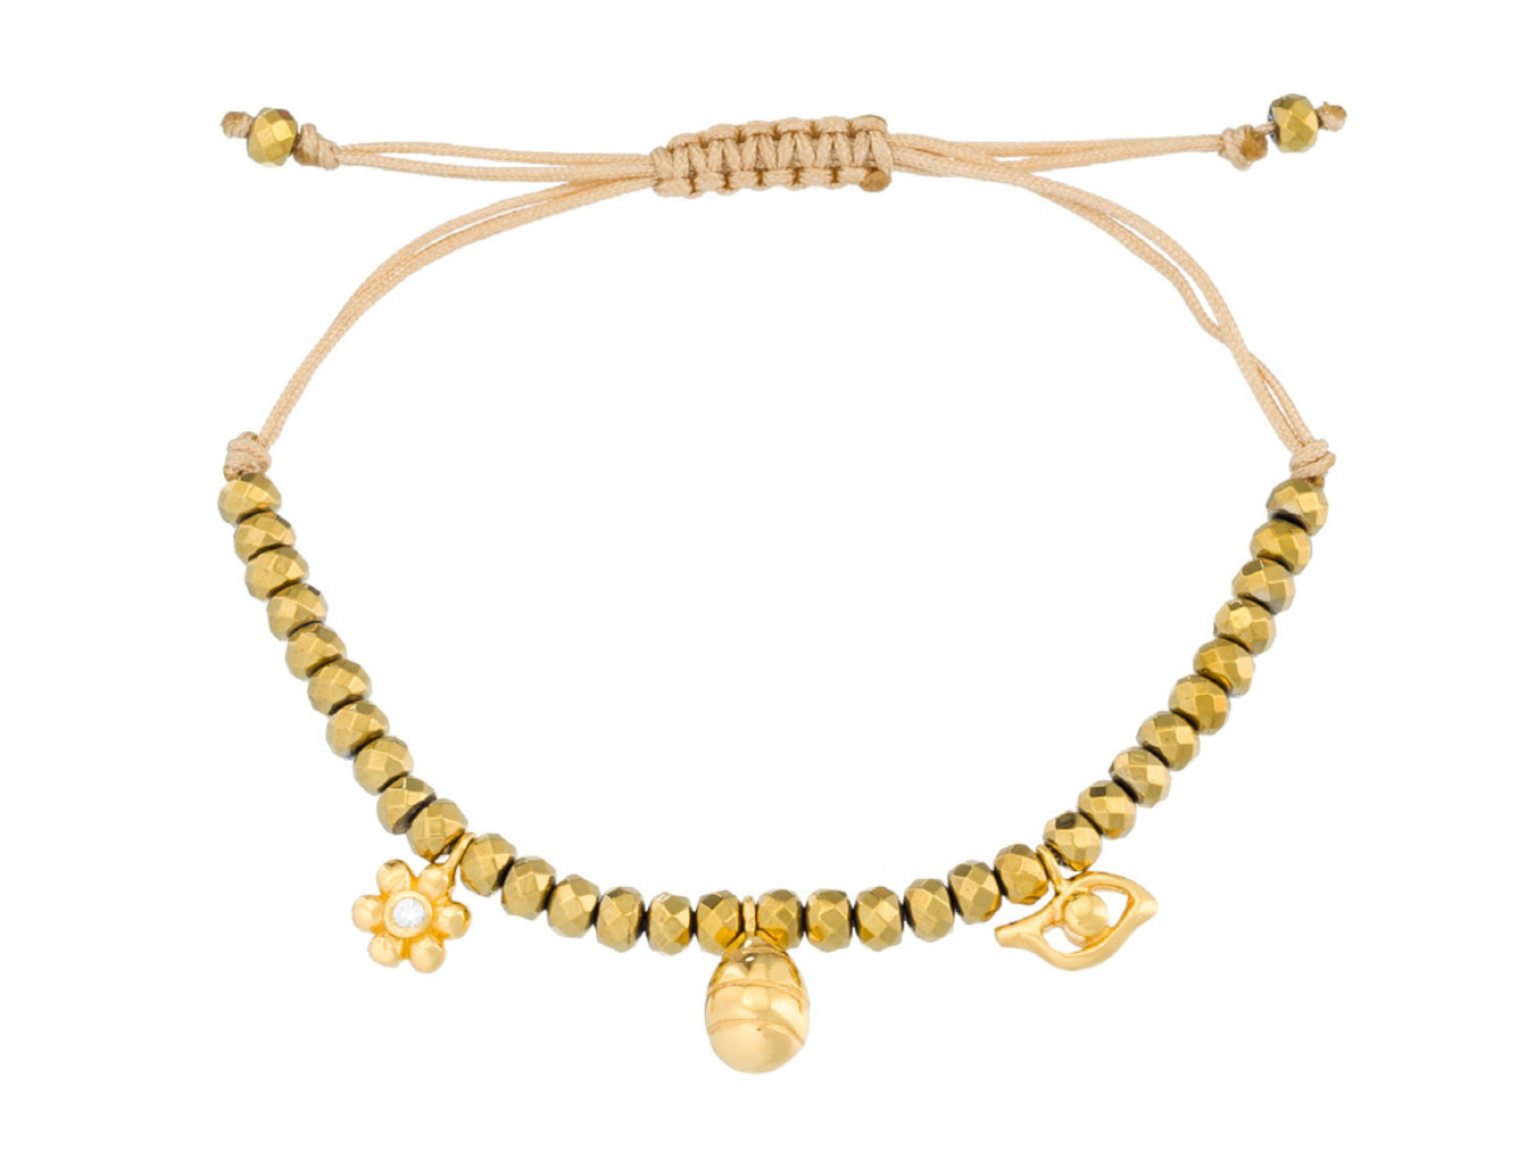 Gold-plated bracelet with charms & hematites